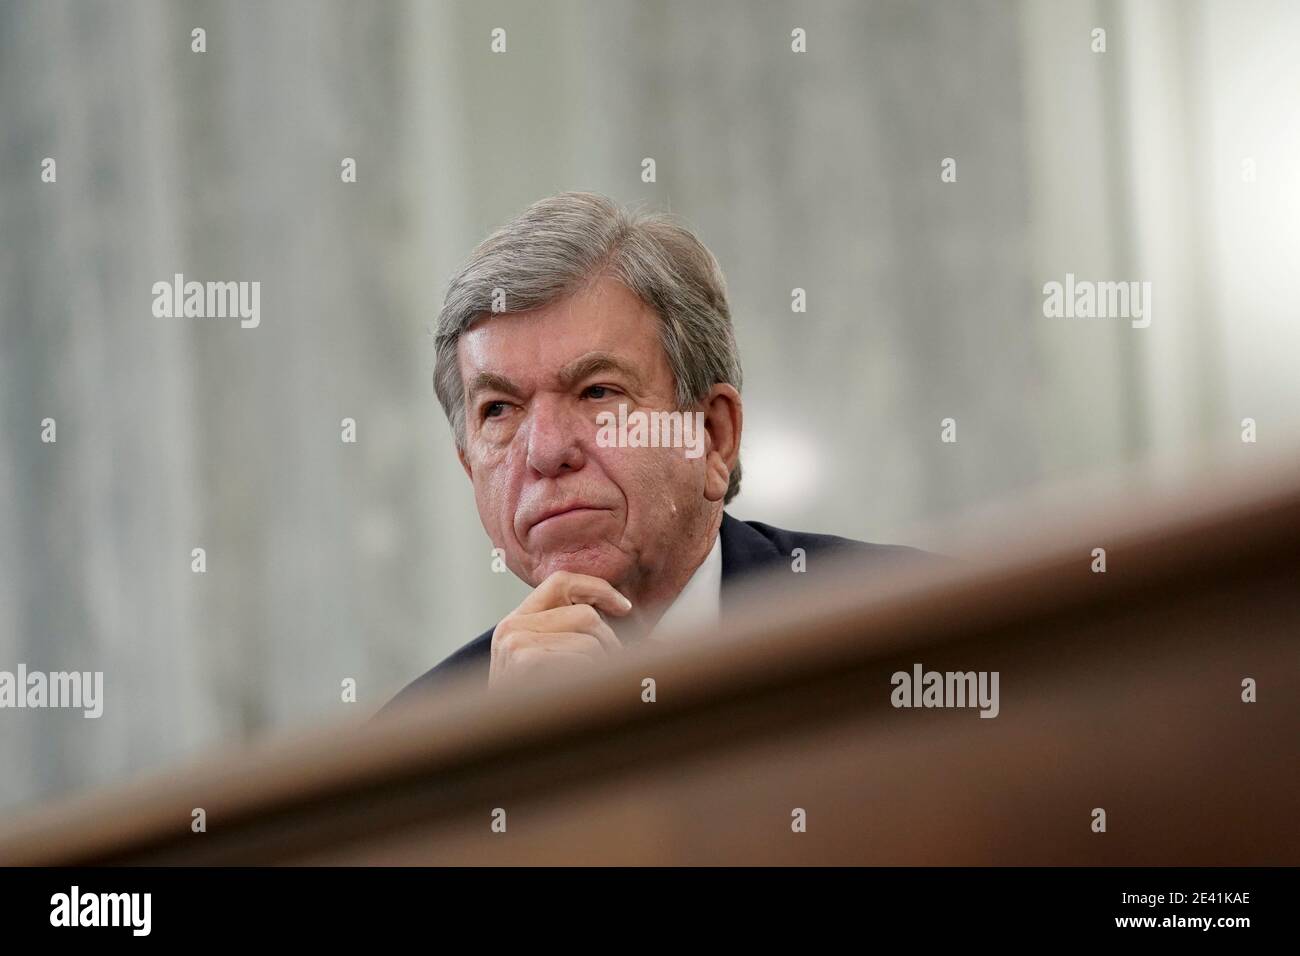 United States Senator Roy Blunt (Republican of Missouri), listens during a Senate Commerce, Science and Transportation Committee confirmation hearing for U.S. Secretary of Transportation nominee Pete Buttigieg in Washington, DC, U.S., on Thursday, Jan. 21, 2021. Buttigieg, is pledging to carry out the administration's ambitious agenda to rebuild the nation's infrastructure, calling it a 'generational opportunity' to create new jobs, fight economic inequality and stem climate change. Photographer: Stefani Reynolds/BloombergCredit: Stefani Reynolds/Pool via CNP | usage worldwide Stock Photo